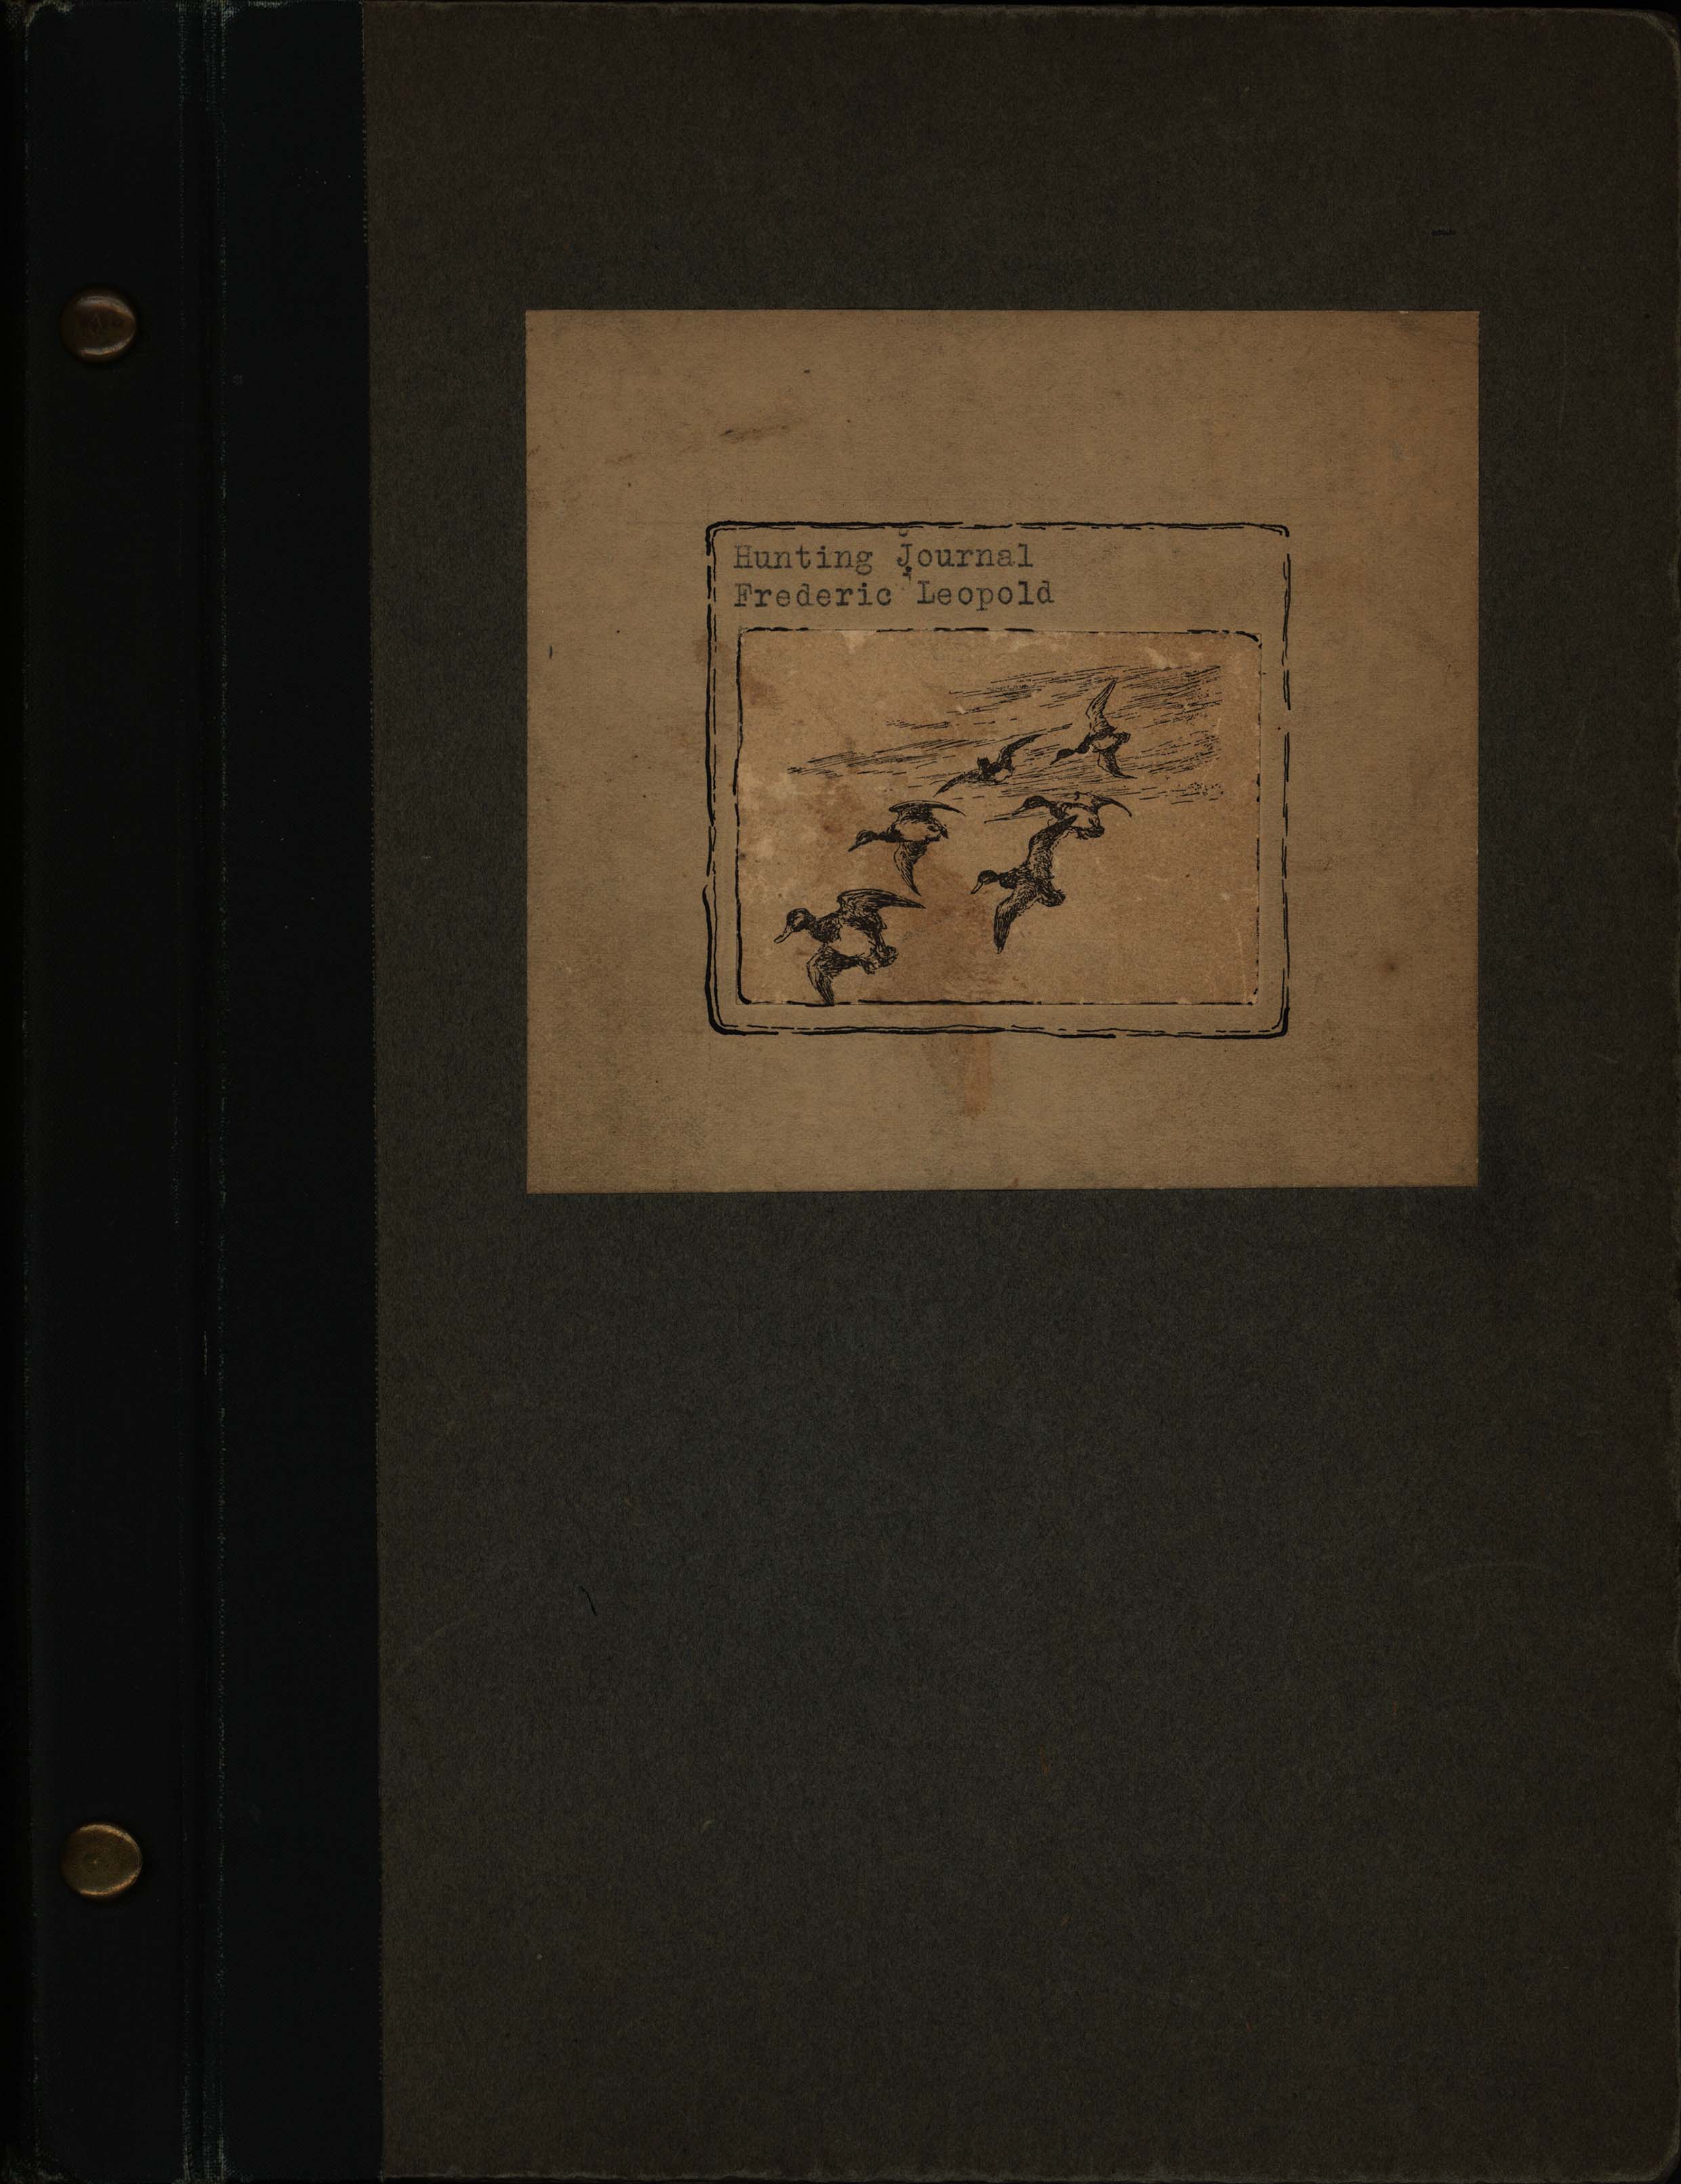 Hunting journal of Frederic Leopold, 1921-1942